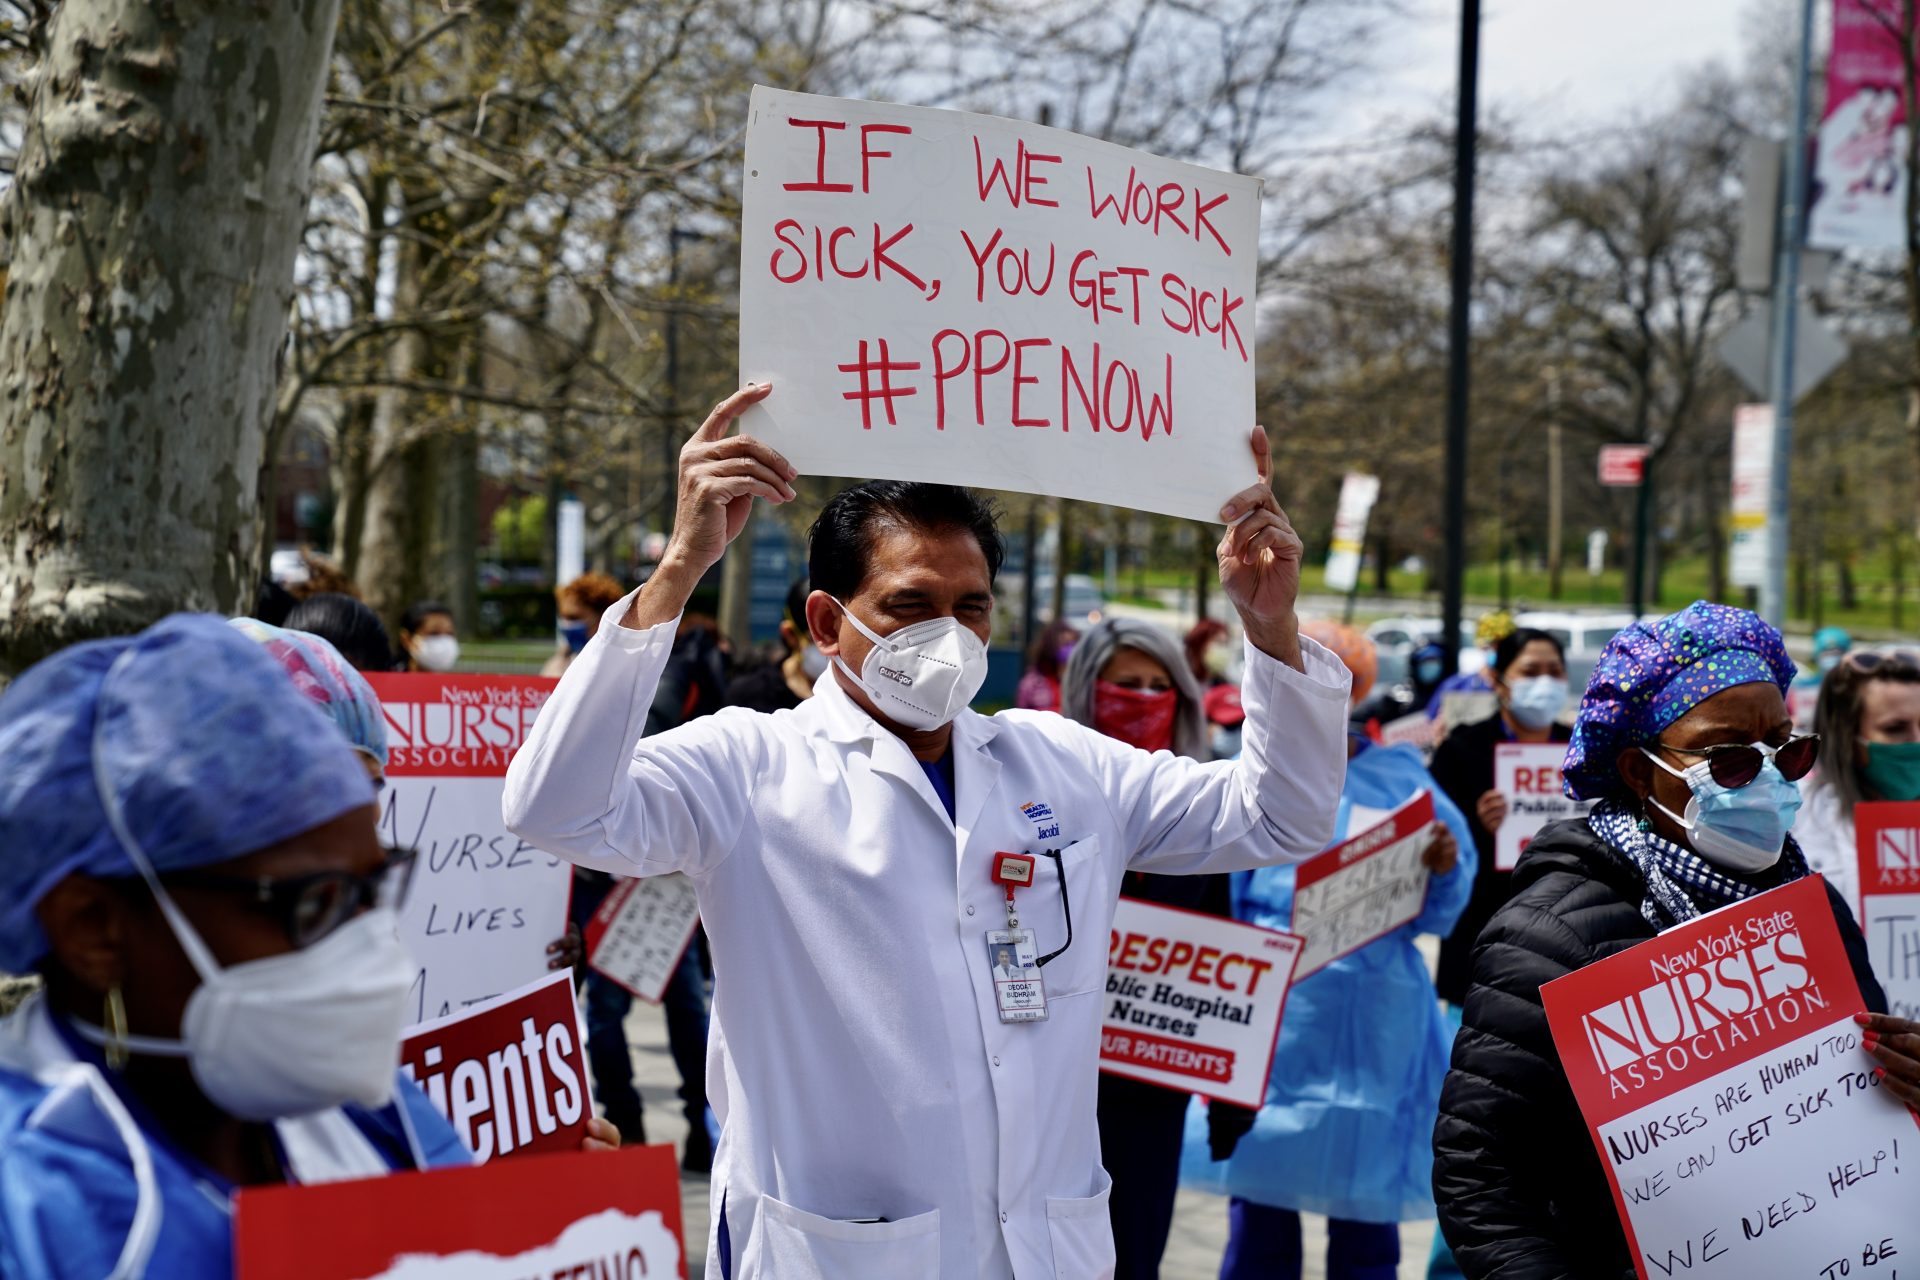 Public health workers, doctors and nurses protest a shortage of PPE outside a hospital in the Bronx on April 17, 2020, in New York, NY.